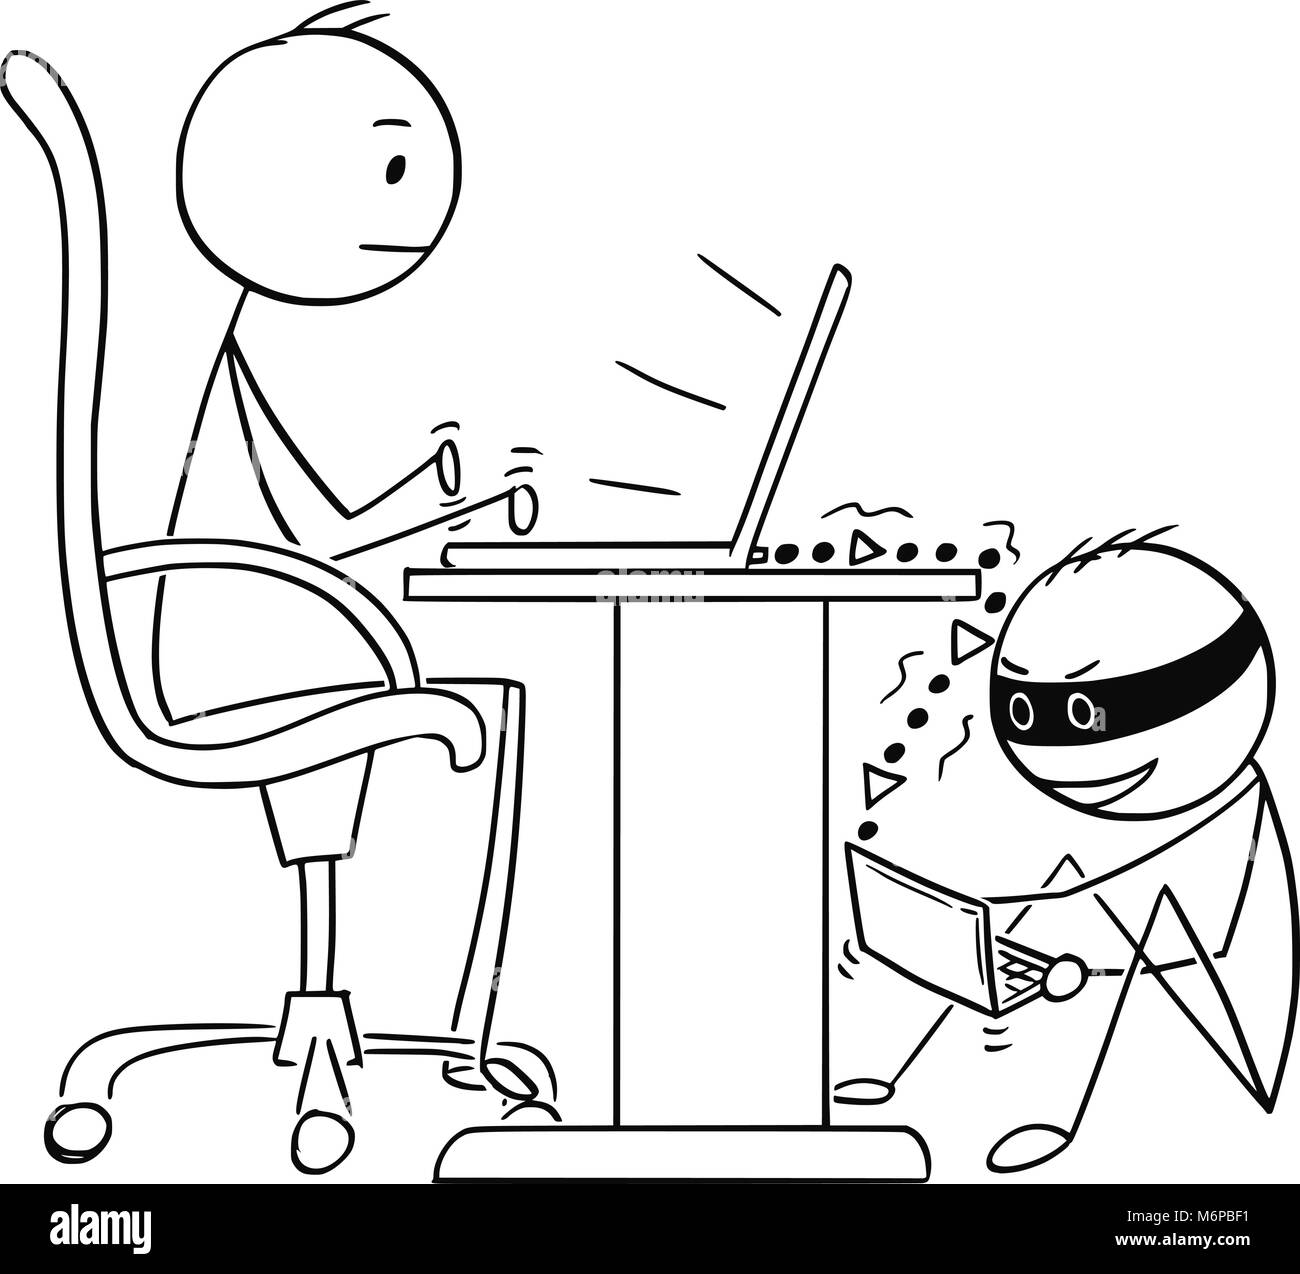 Cartoon of Man or Businessman Working on Computer While Hacker is Stealing His Data Stock Vector